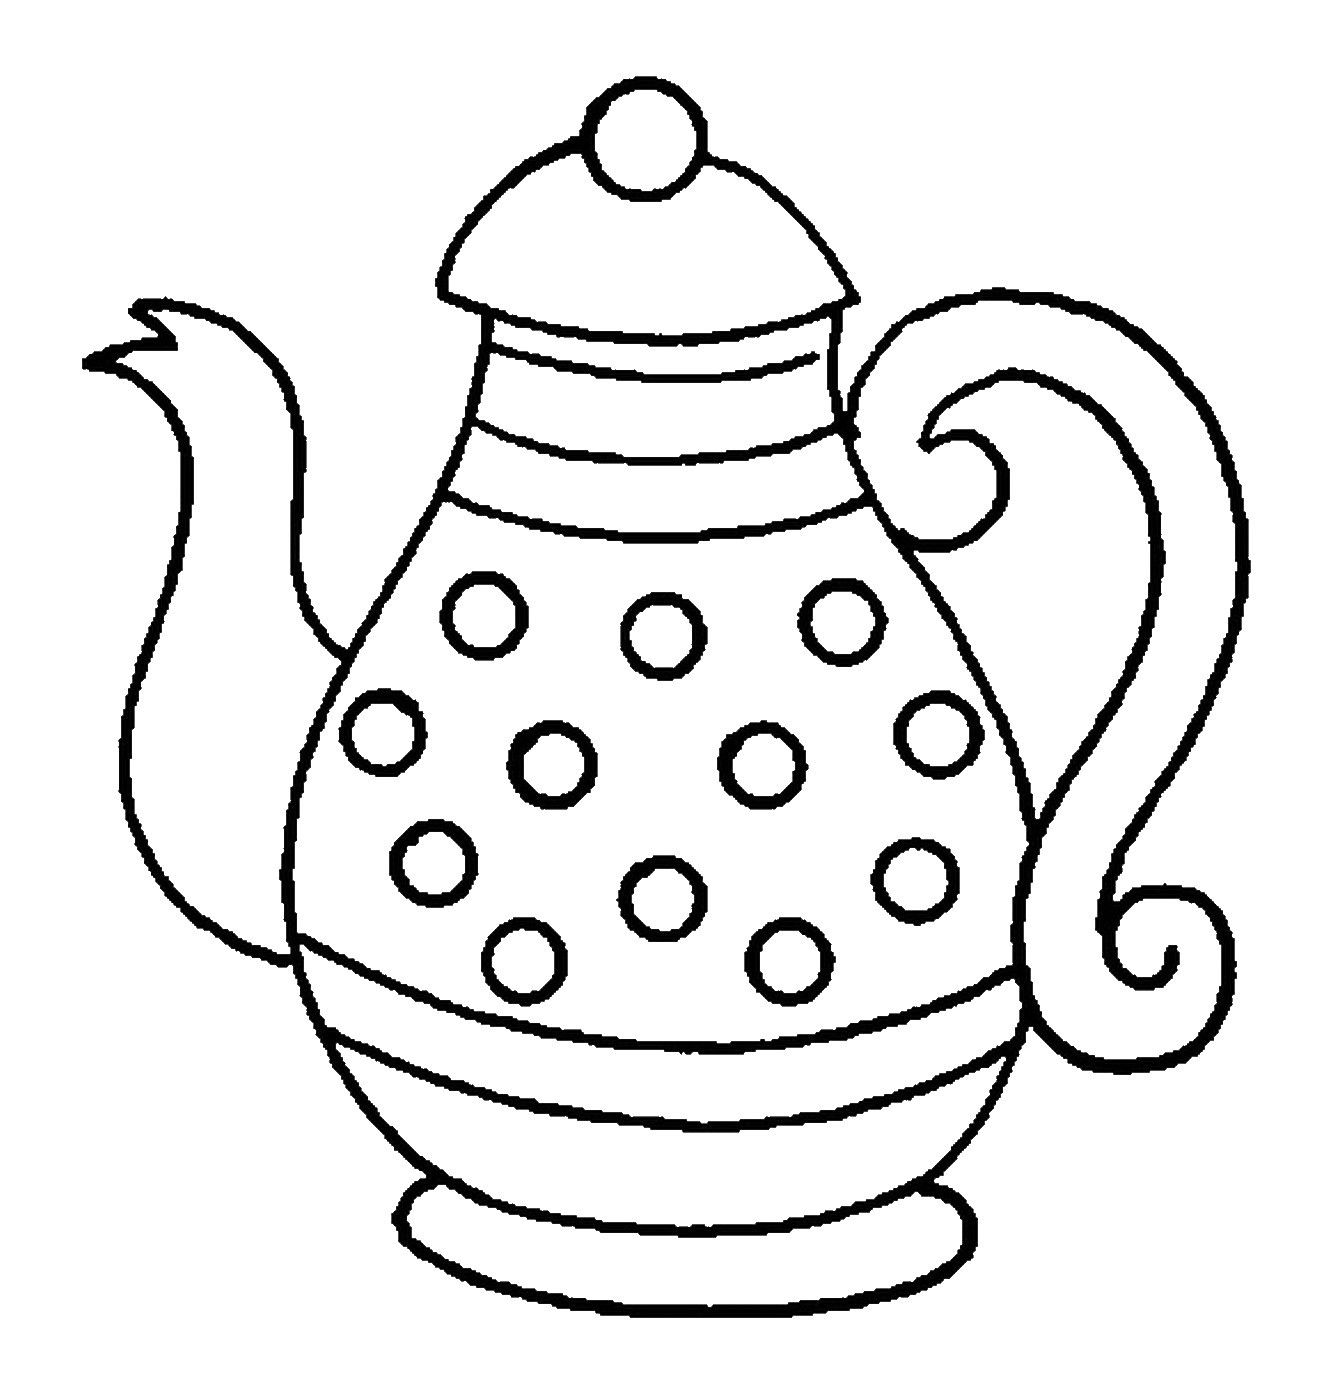 Tea Party Coloring Pages
 Tea Party Coloring Pages